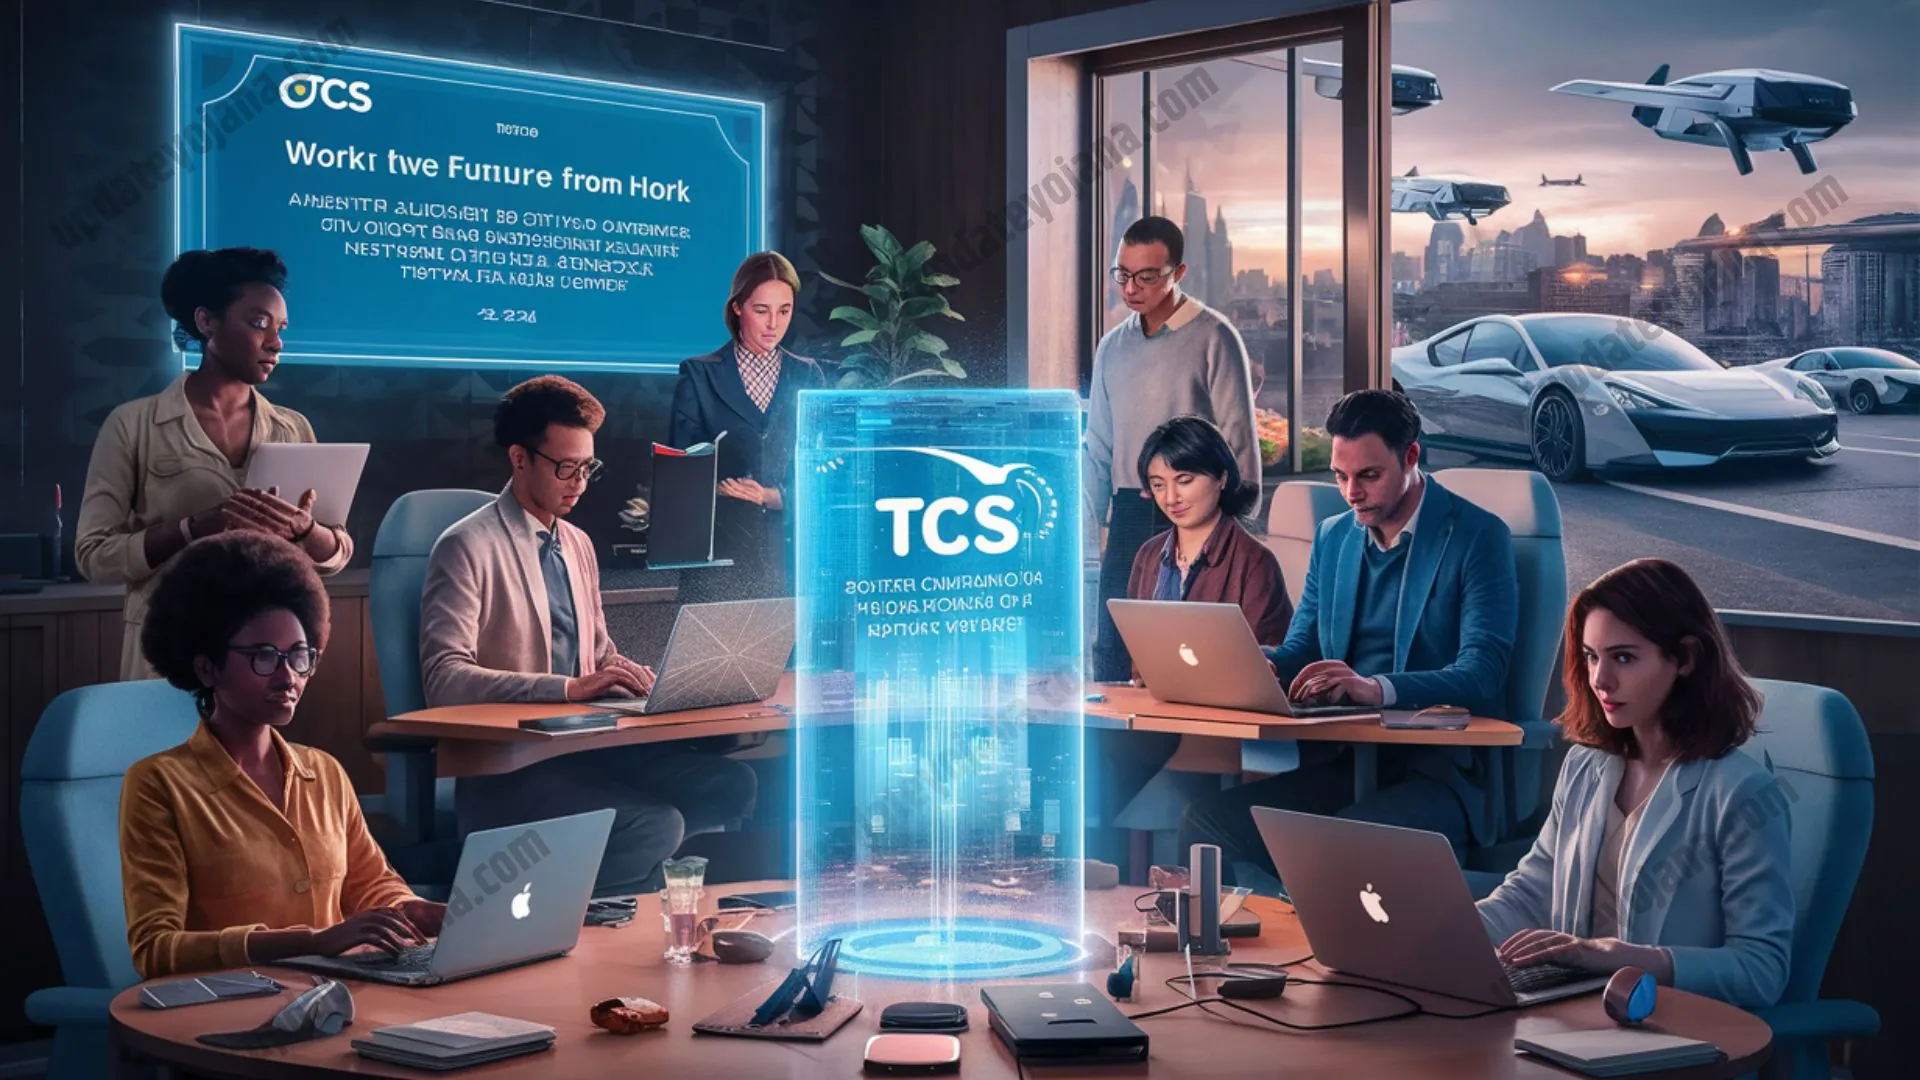 TCS Work From Home Job 2024